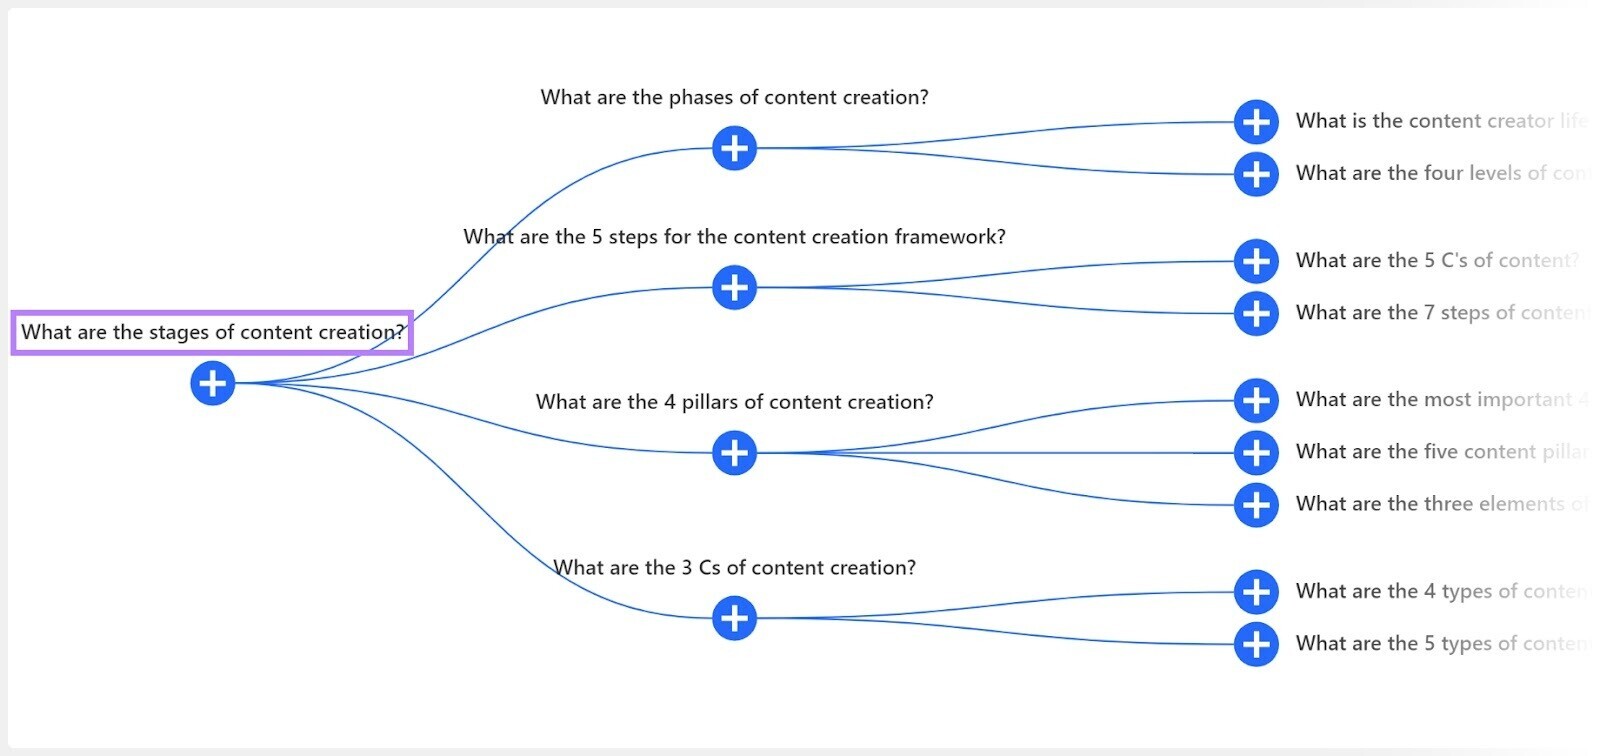 a new diagram starting from "what are the stages of content creation?" question